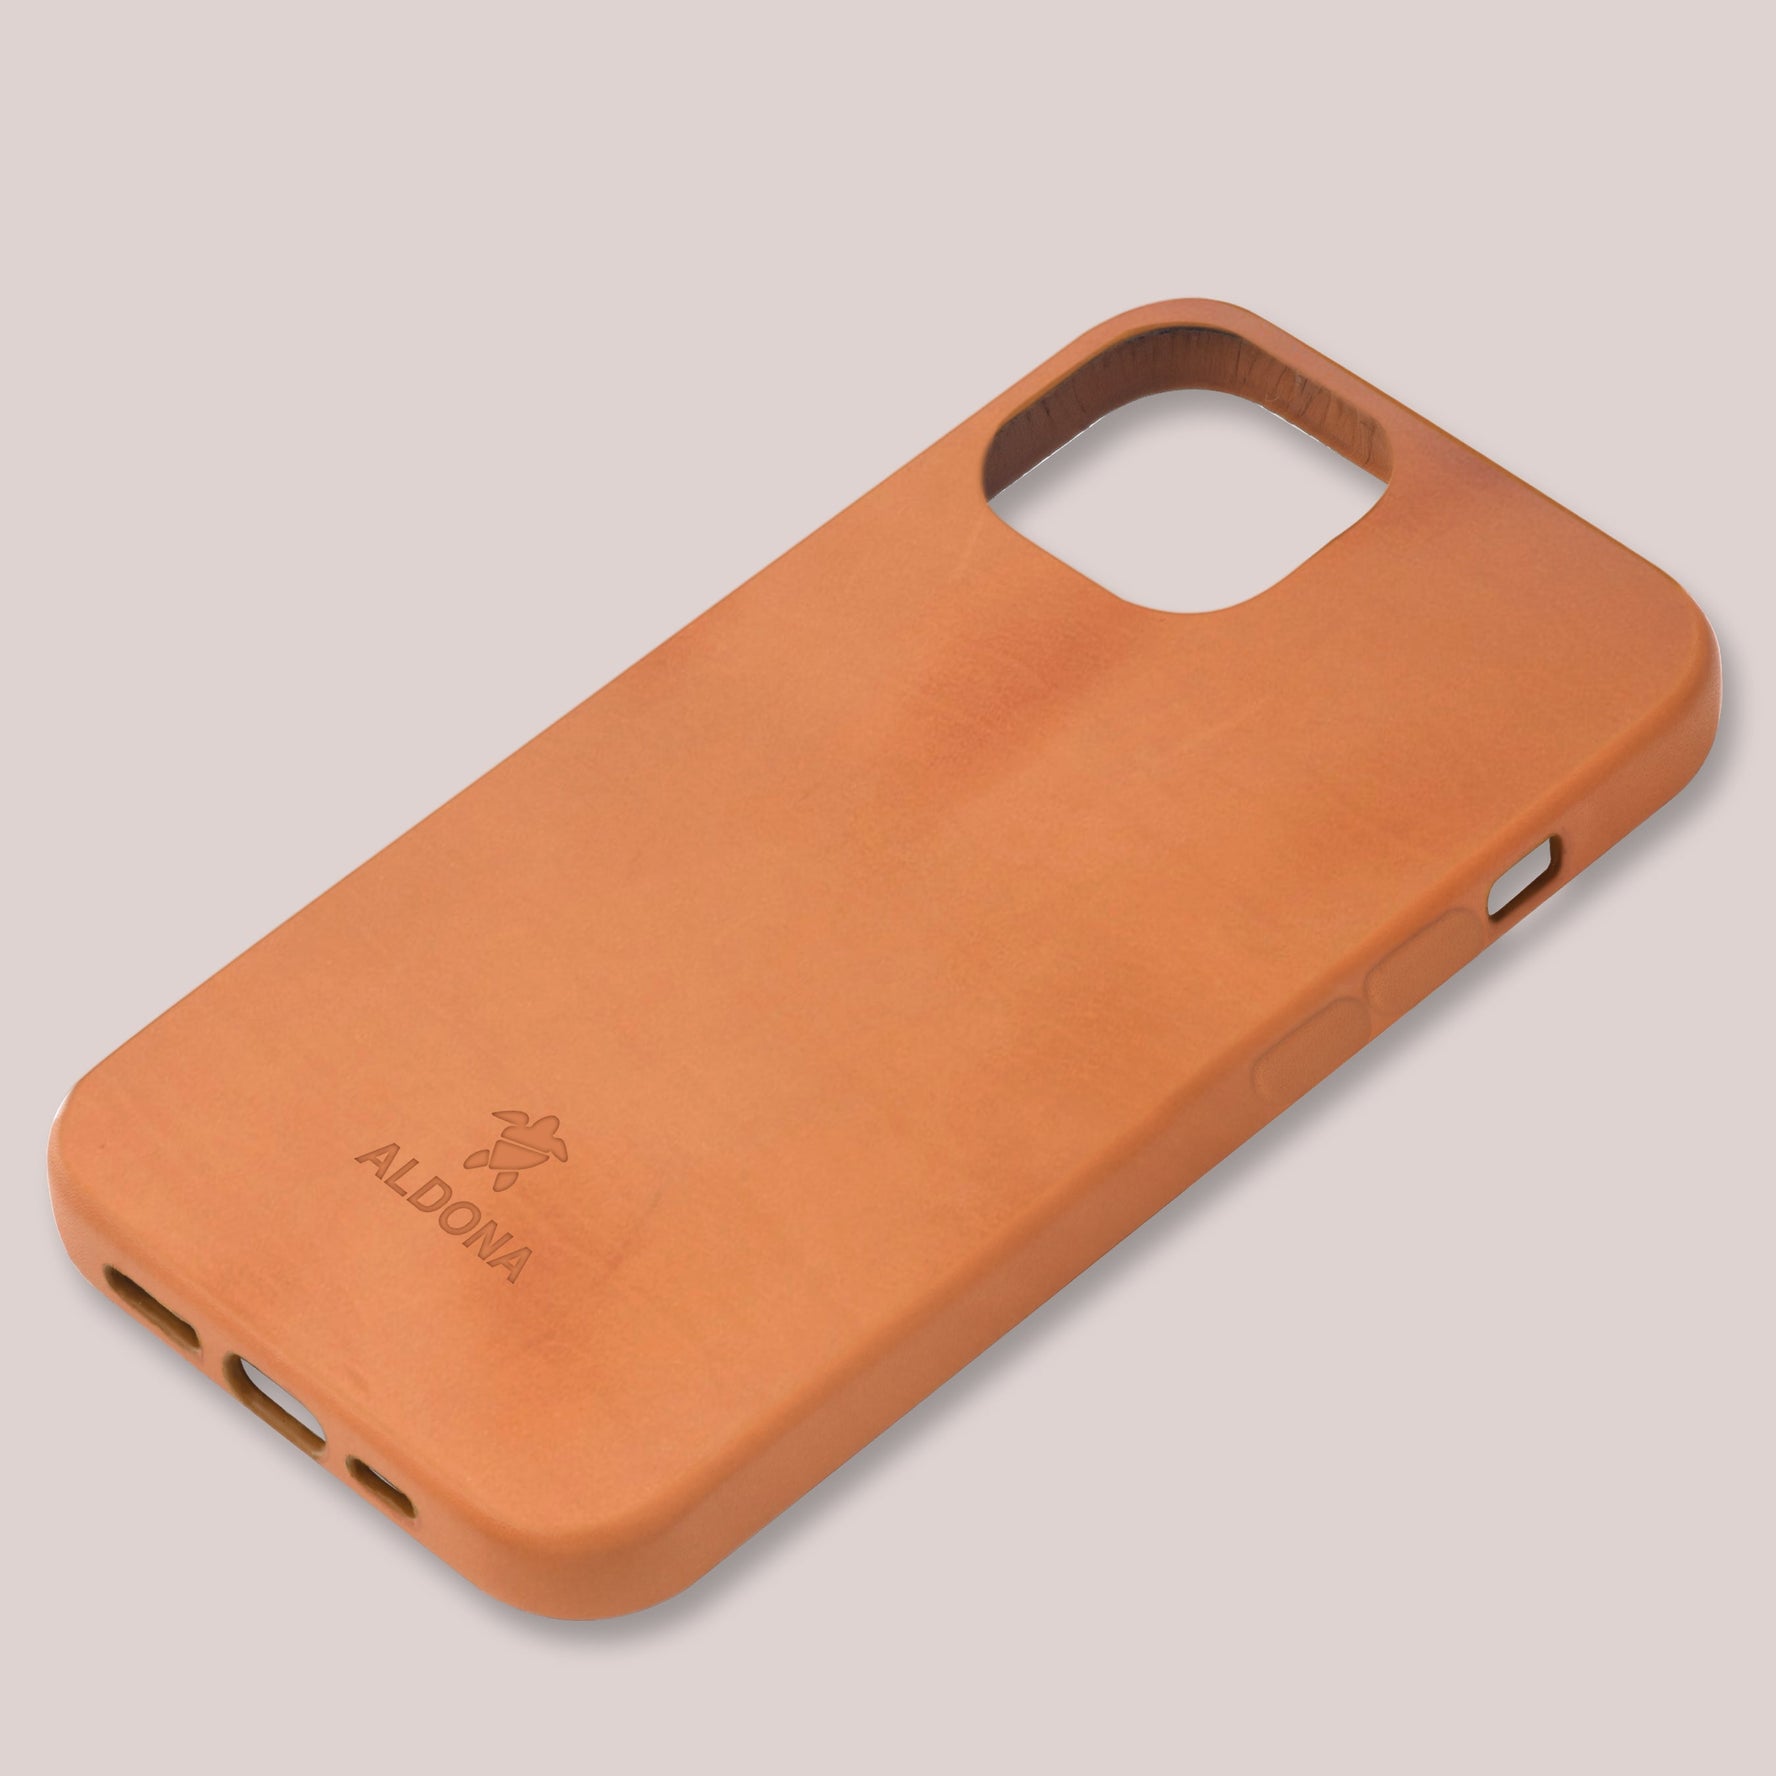 Kalon Case for iPhone 14 Plus with MagSafe Compatibility - Vintage Tan